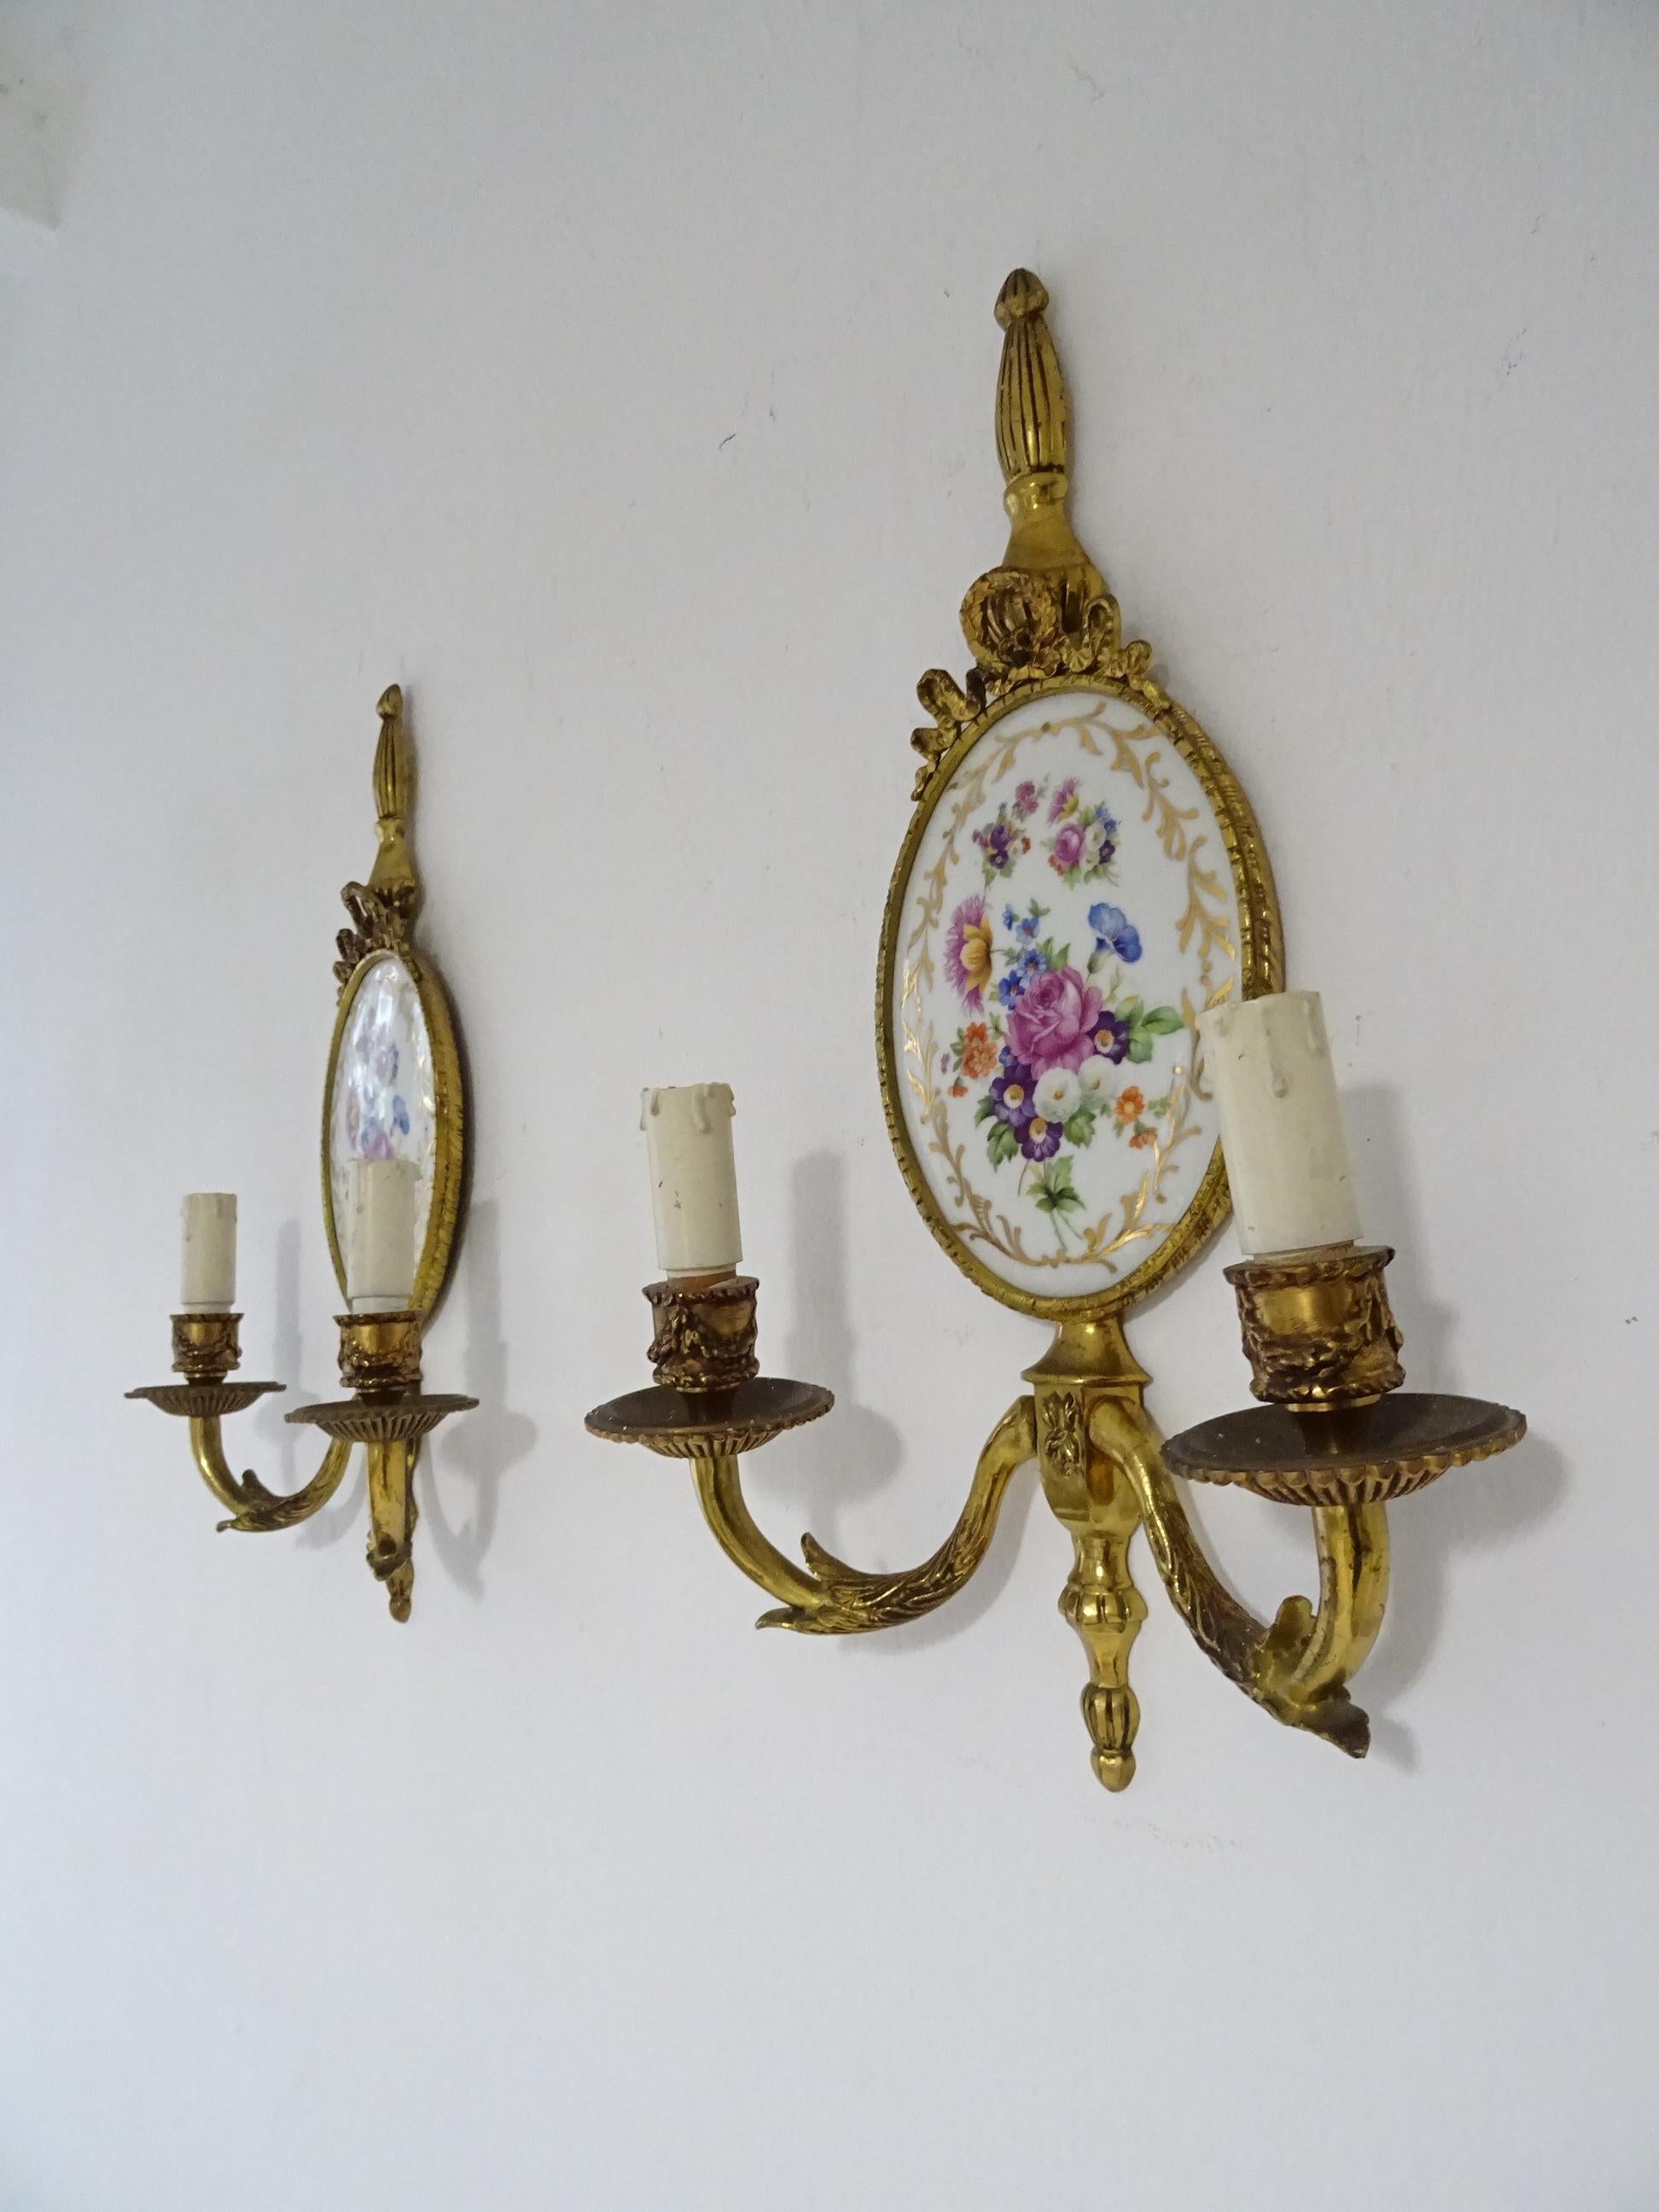 Hand-Painted Set of 3 French Sevres Porcelain Flowers Dore Sconces, circa 1900